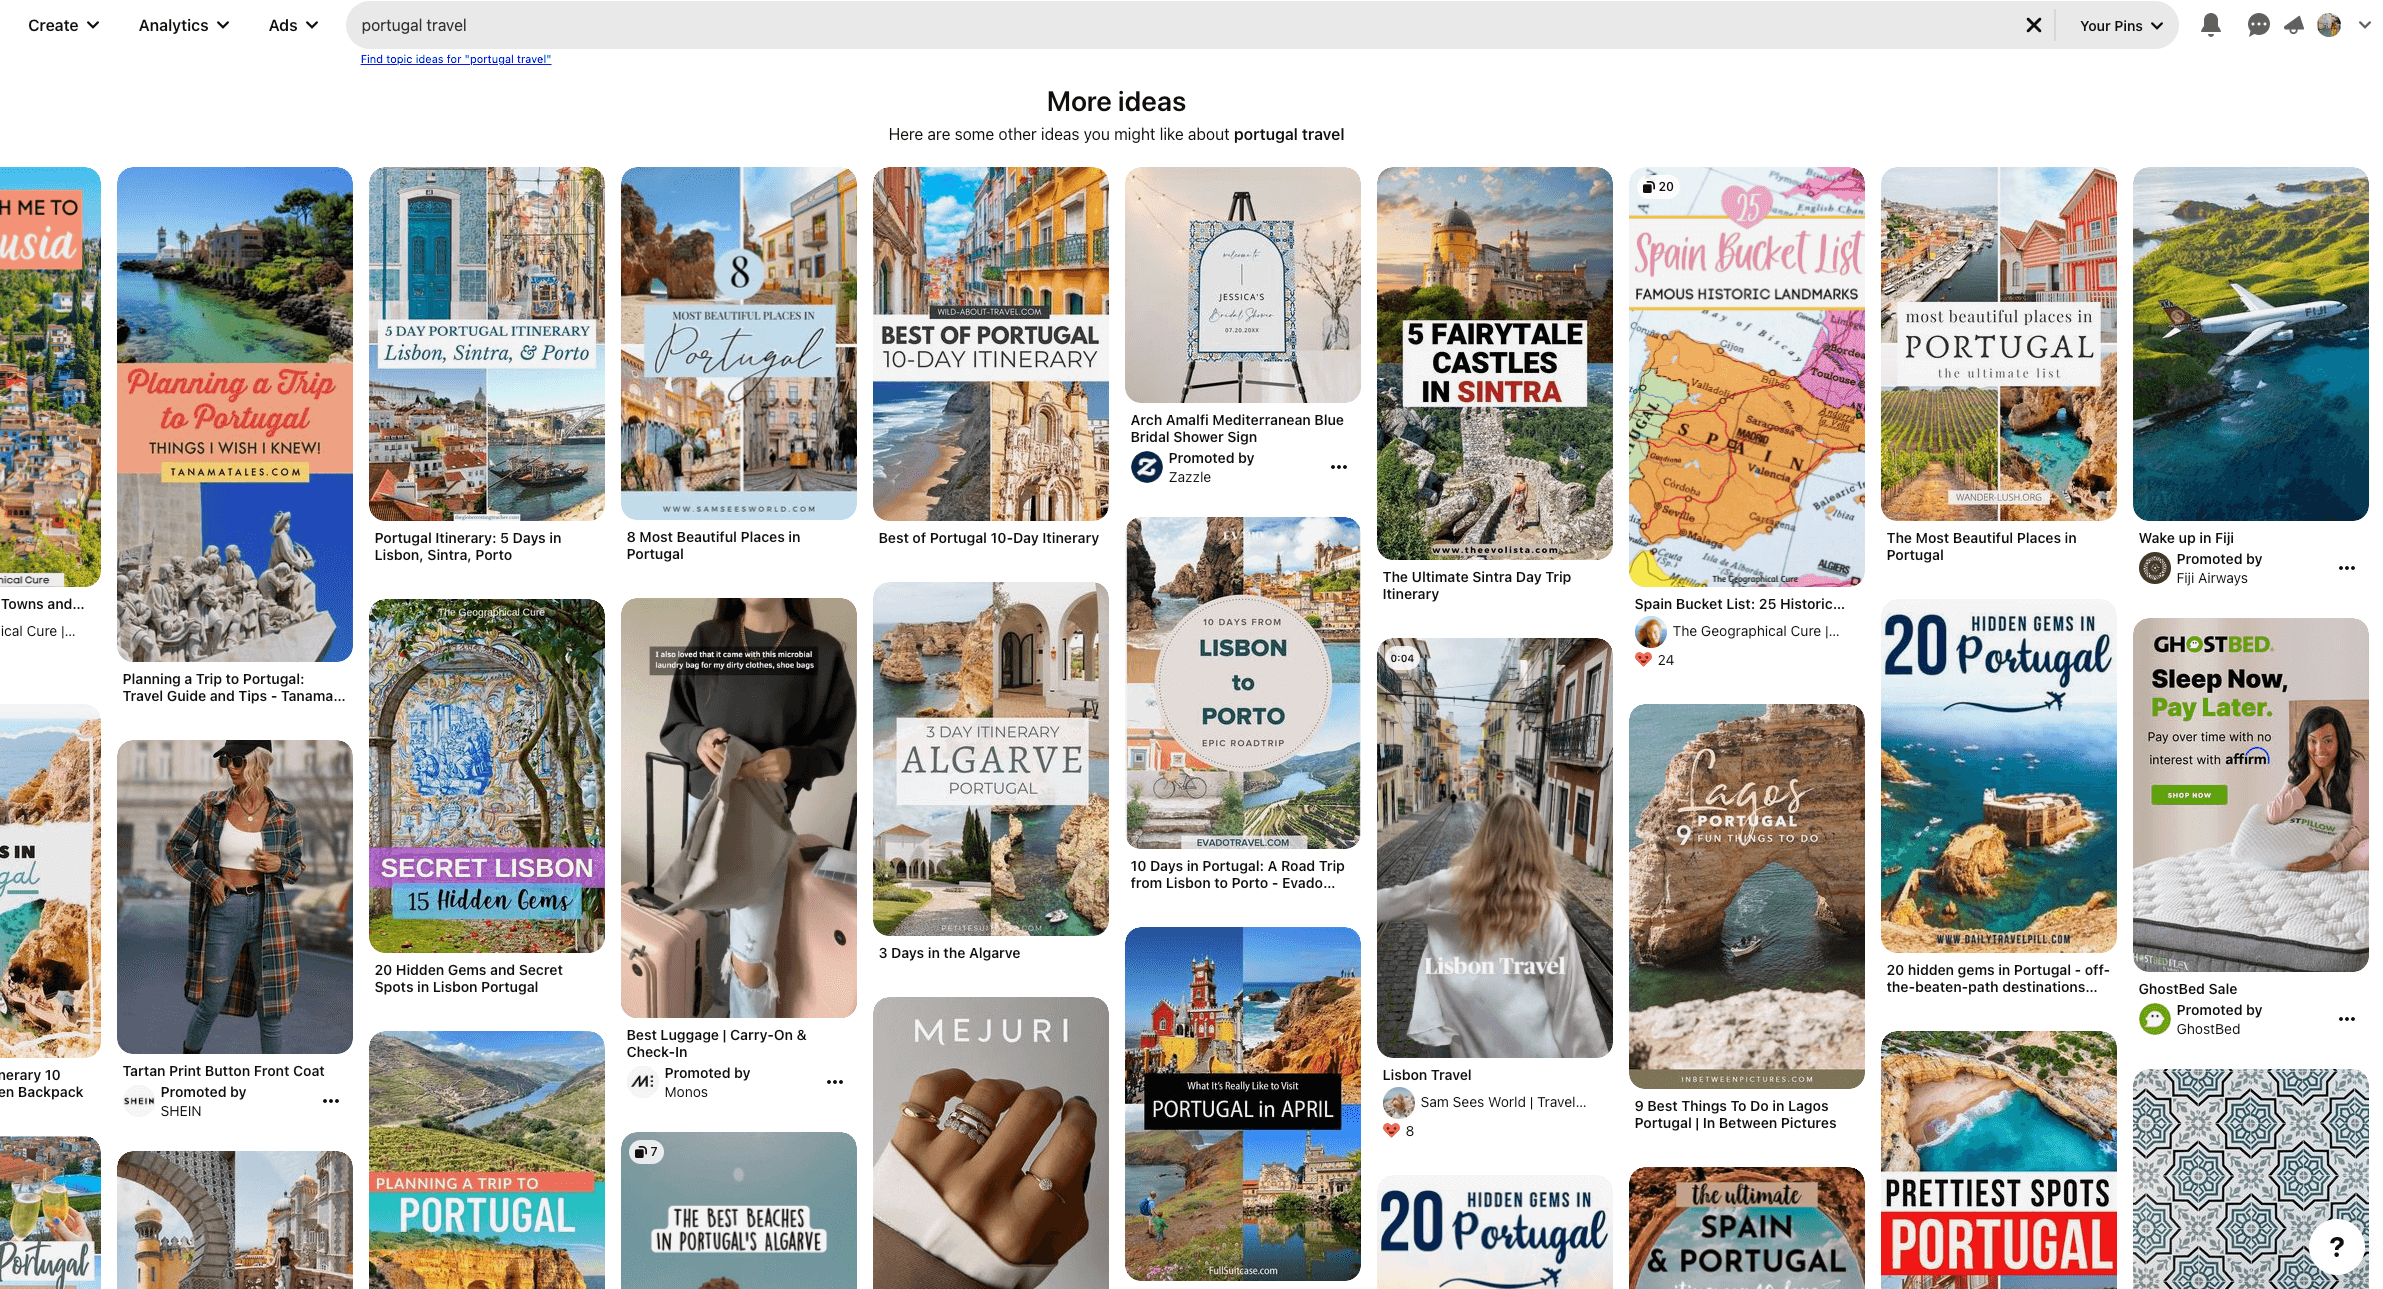 Travel Guide  Insider tips, hidden gems, itineraries and more